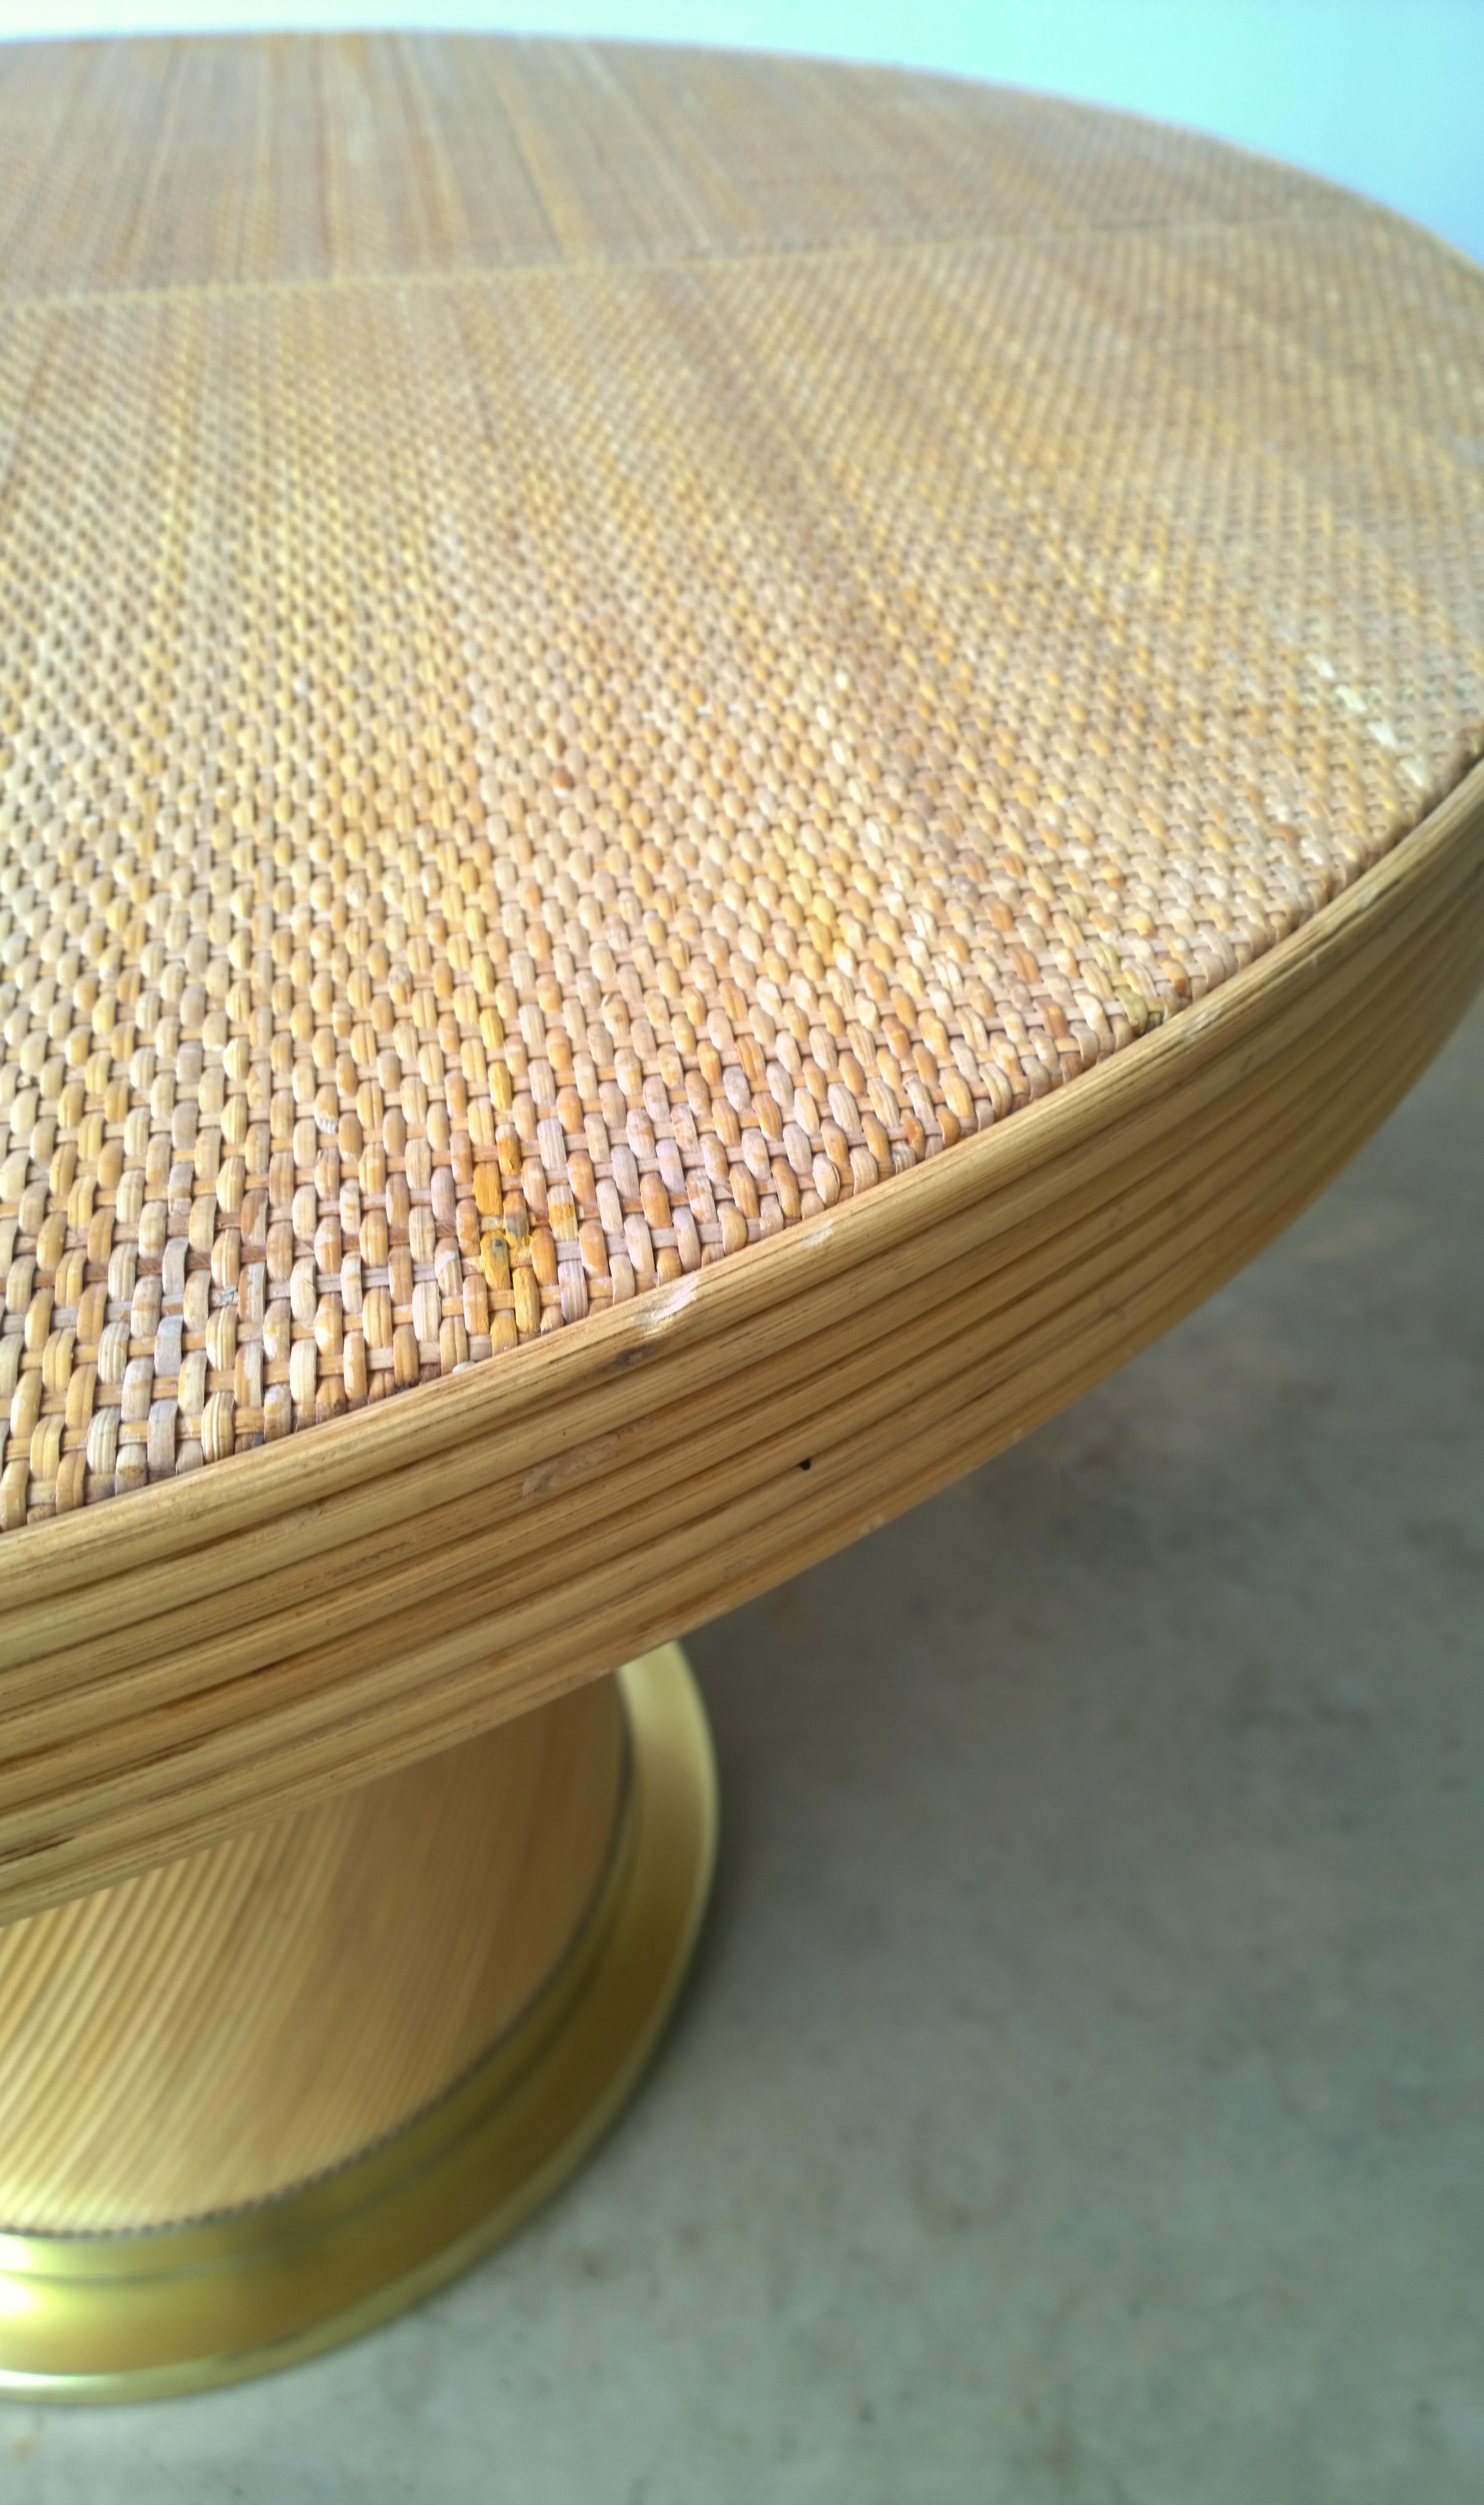 American Rattan Cane & Wicker Circular Pedestal Center Table/Dining Table with Brass Base